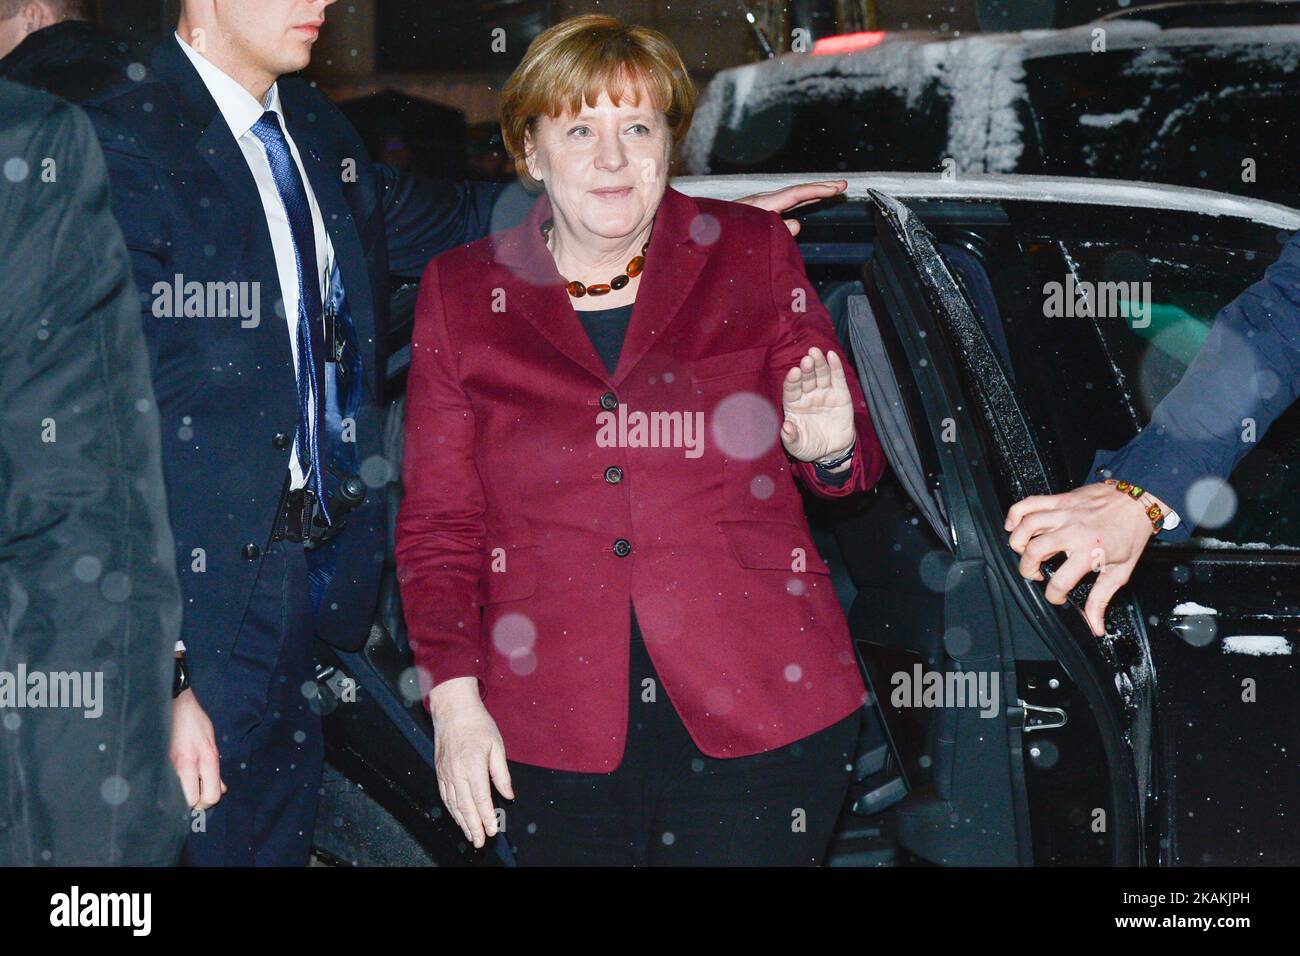 The Chancellor of Germany, Angela Merkel, arrives to meet the Leader of PiS (Law and Justice), Jaroslaw Kaczynski, during her visit to Poland, Hotel Bristol on Tuesday, 7 February 2017, in Warsaw, Poland (Photo by Artur Widak/NurPhoto) *** Please Use Credit from Credit Field *** Stock Photo